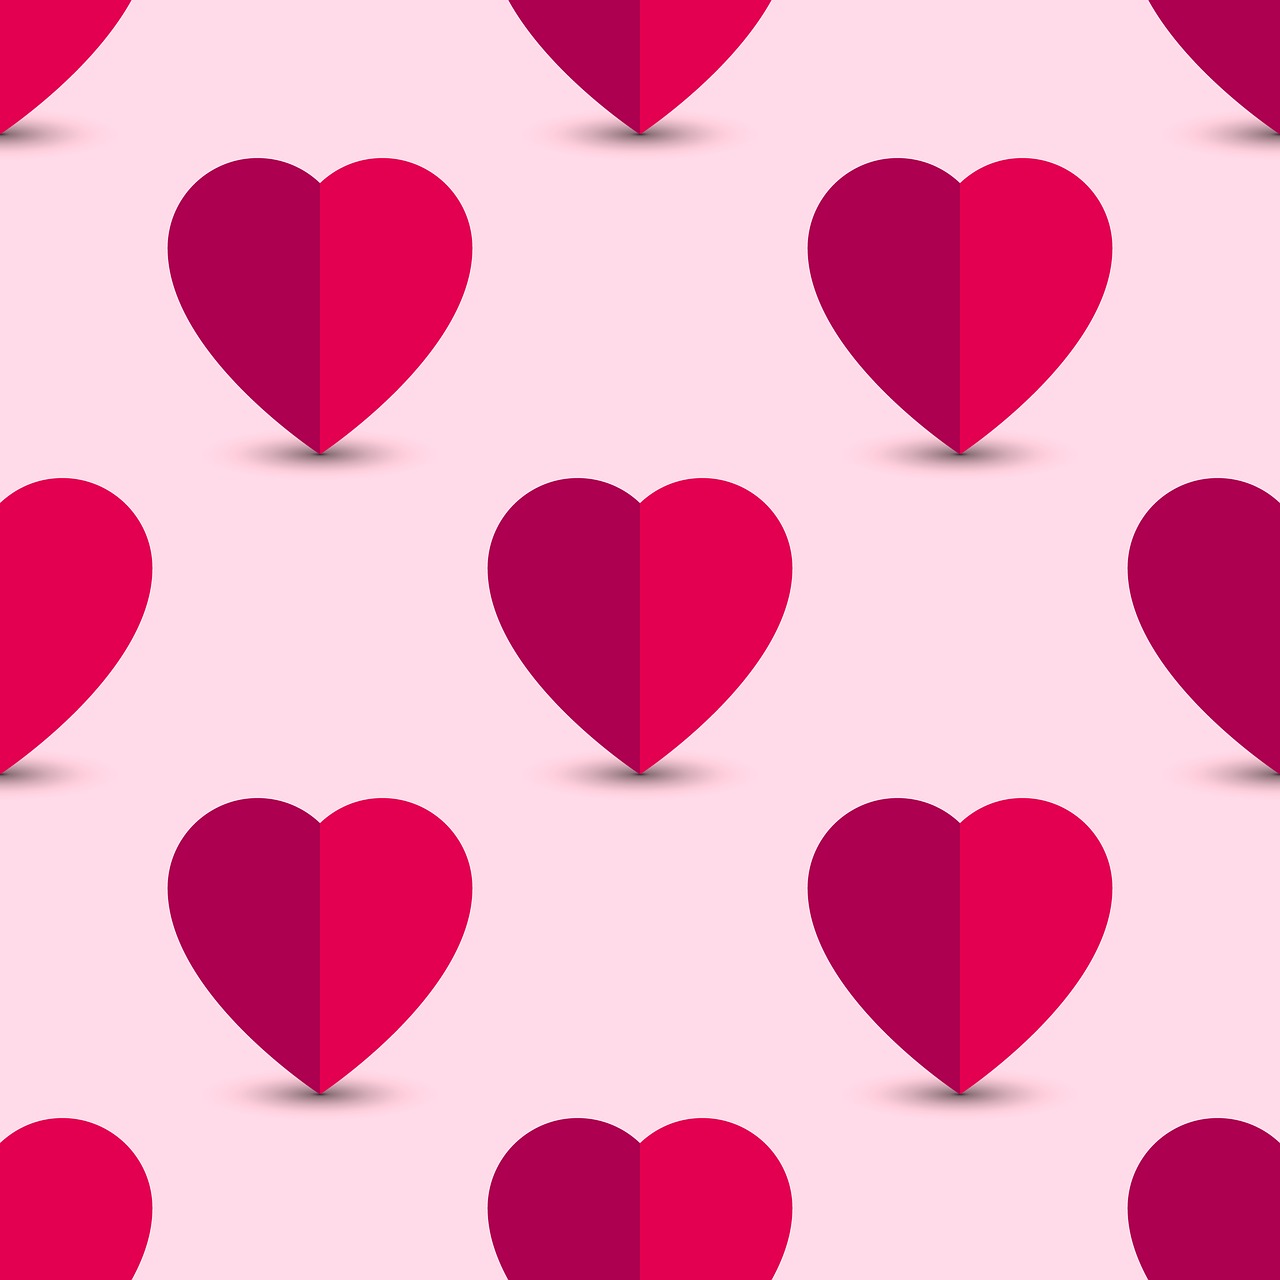 the heart pattern background free photo